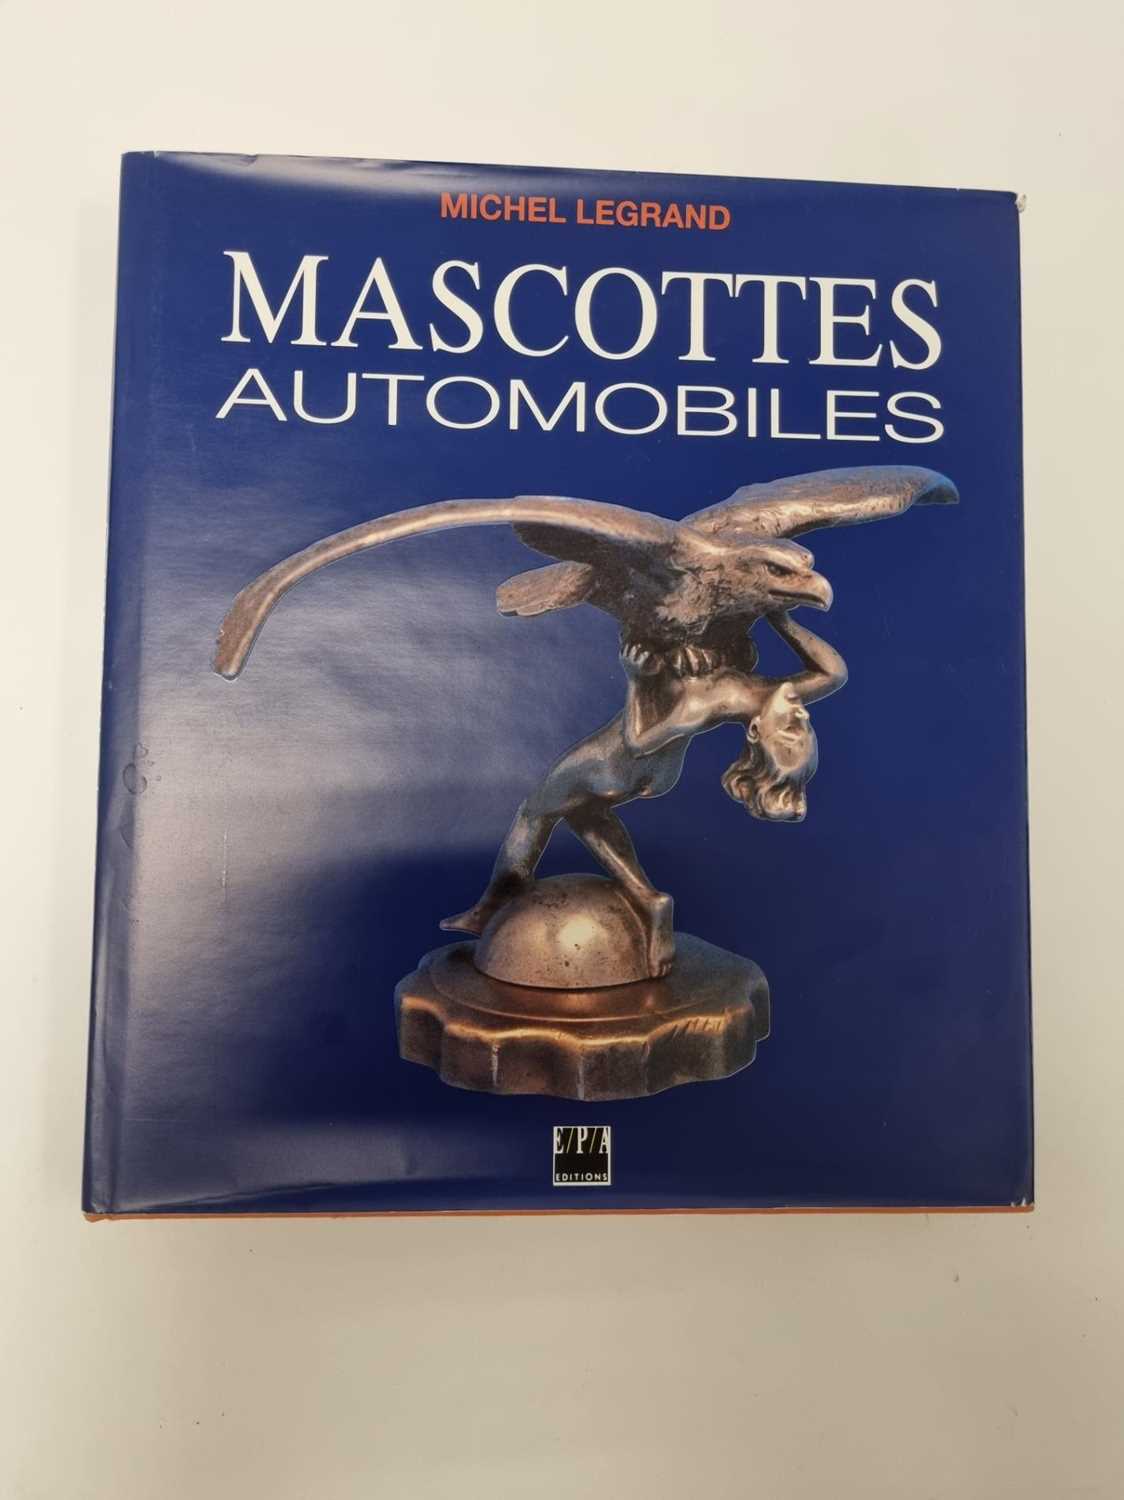 Lot 406 - Legrand (Michel), Mascottes Automobiles, first edition 1993, with dust jacket.